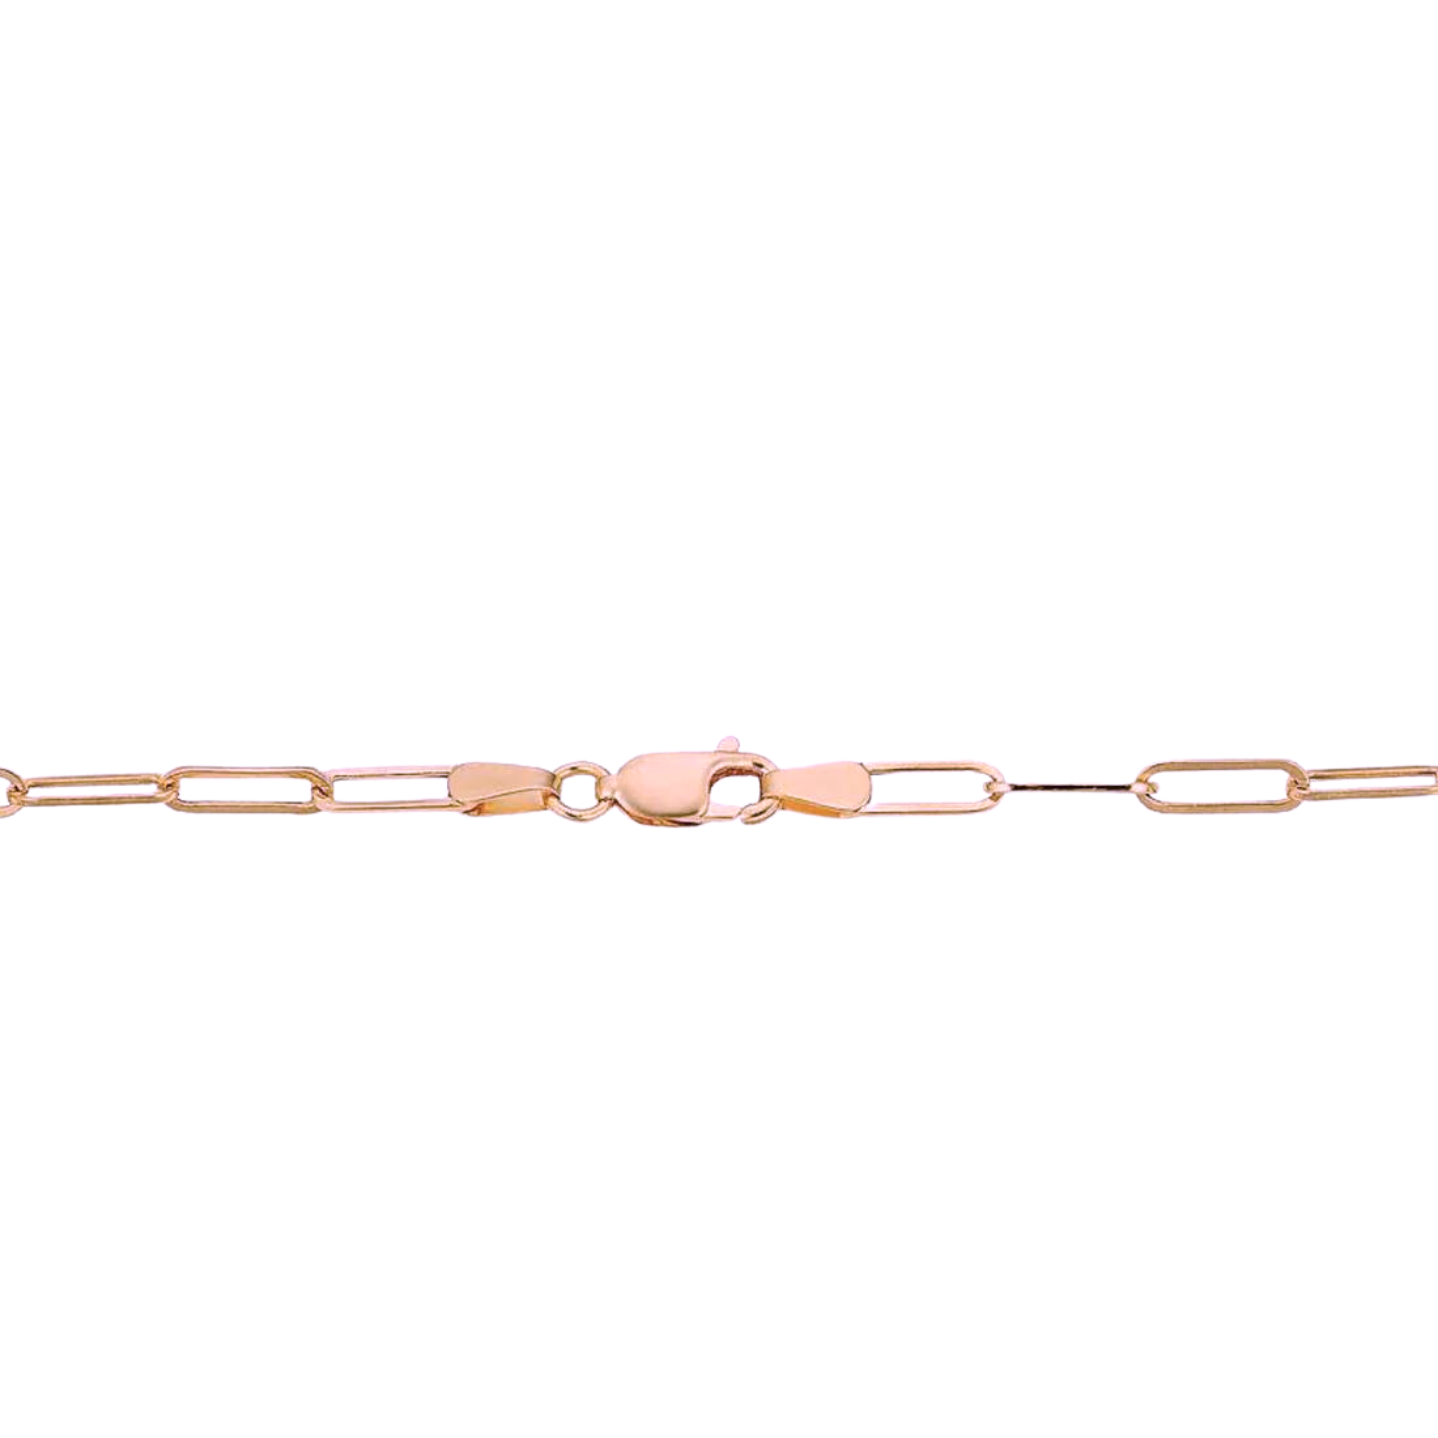 Paper Clip Chain - 10KT Rose Gold Chain